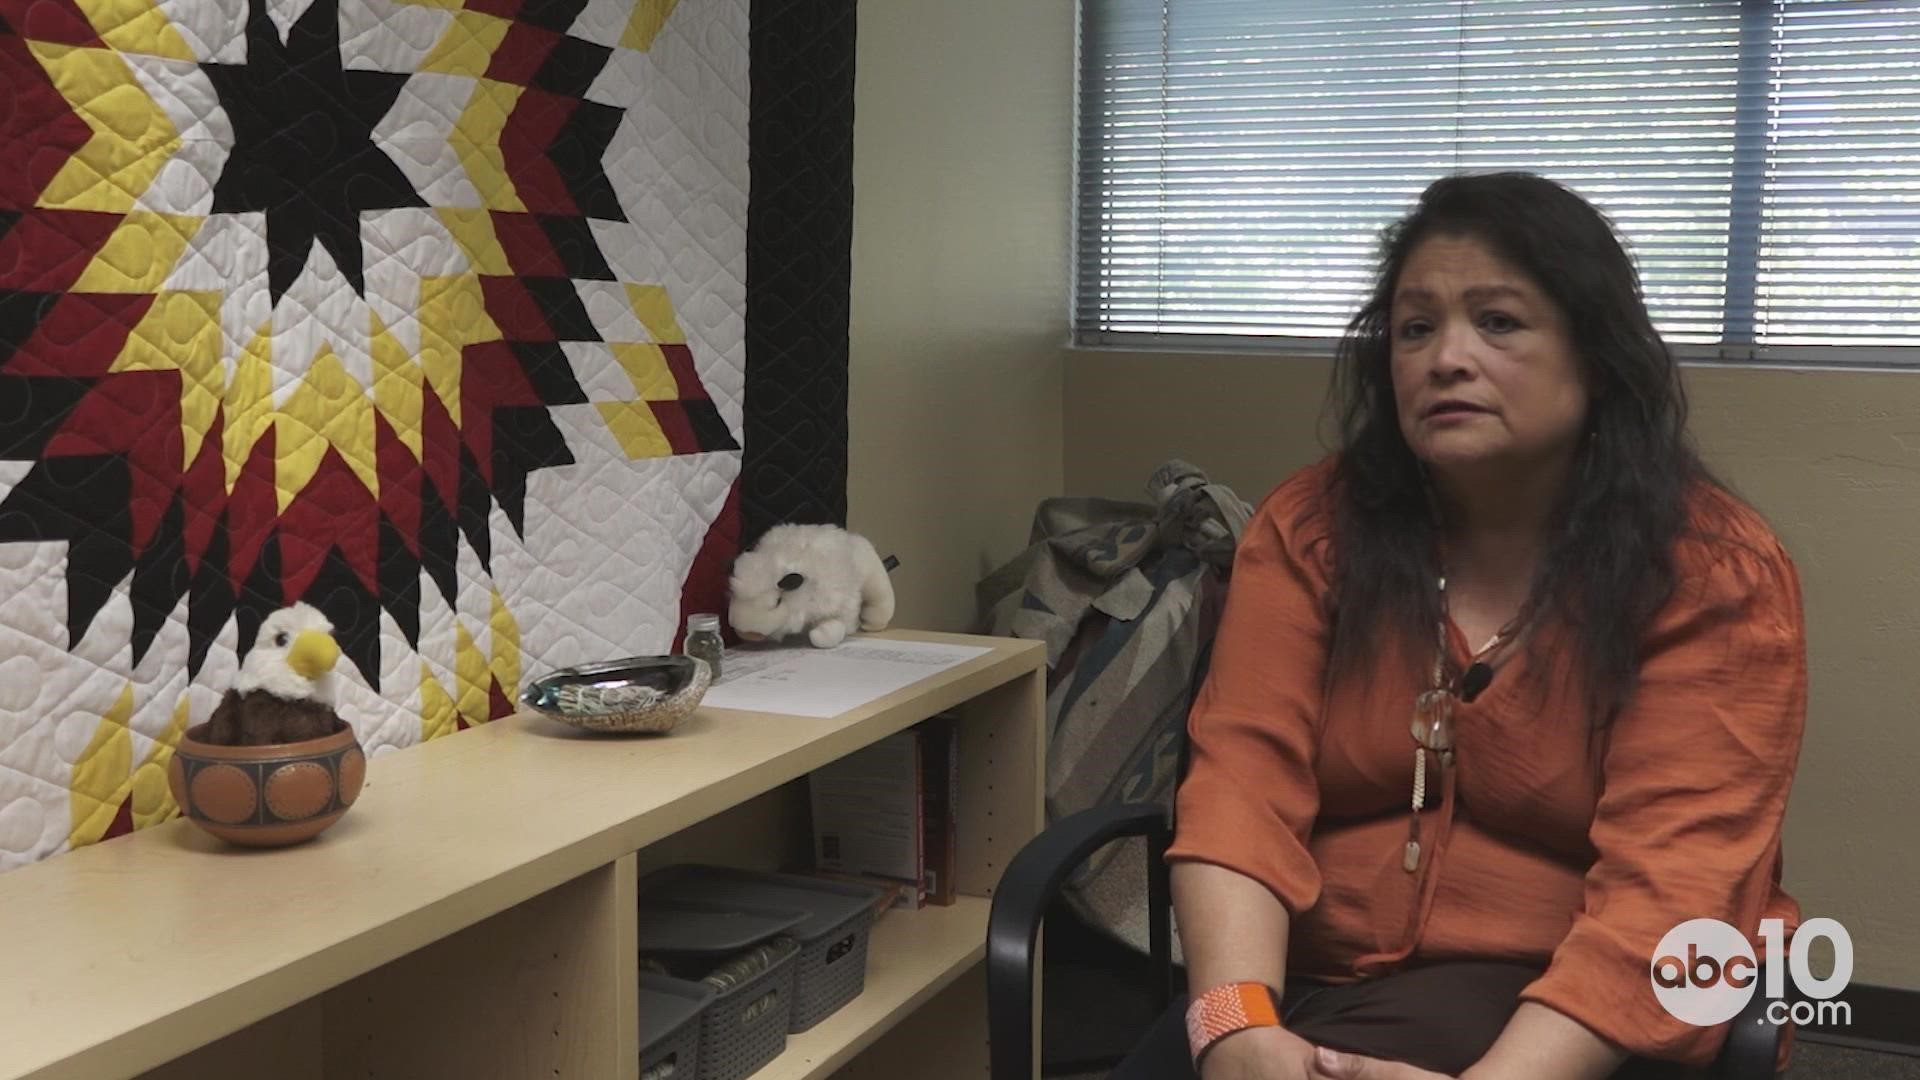 SNAHC's Care Coordinator Supervisor, Julie Fuentes, explains how the organization provides resources to help young Indigenous people in Sacramento.